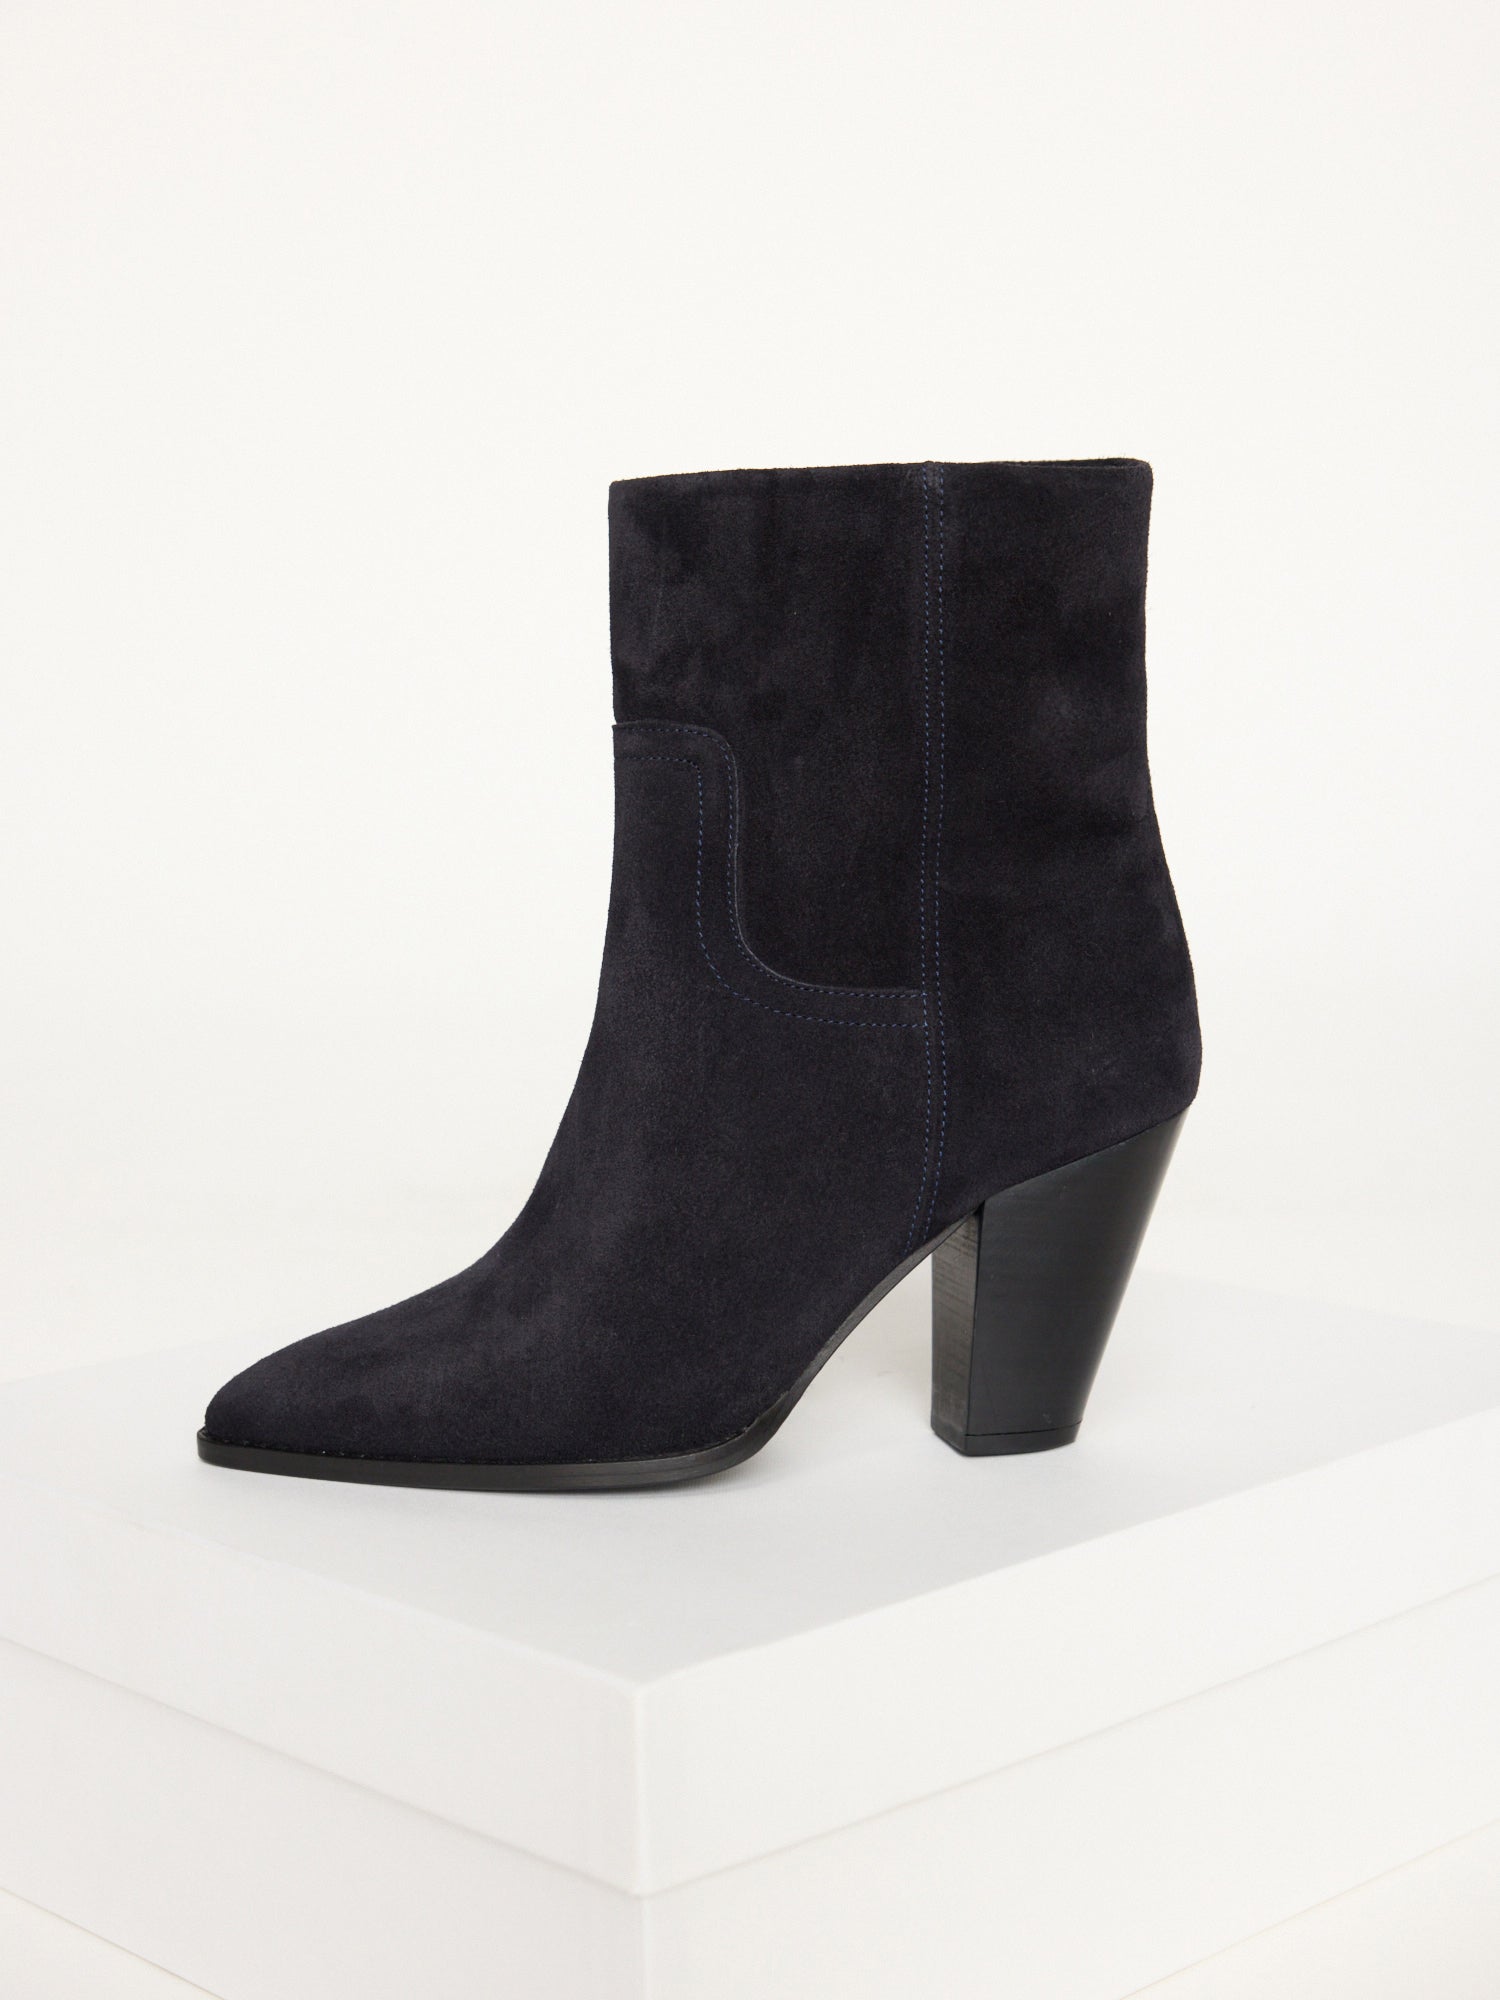 Marfa blue suede boot side view 4